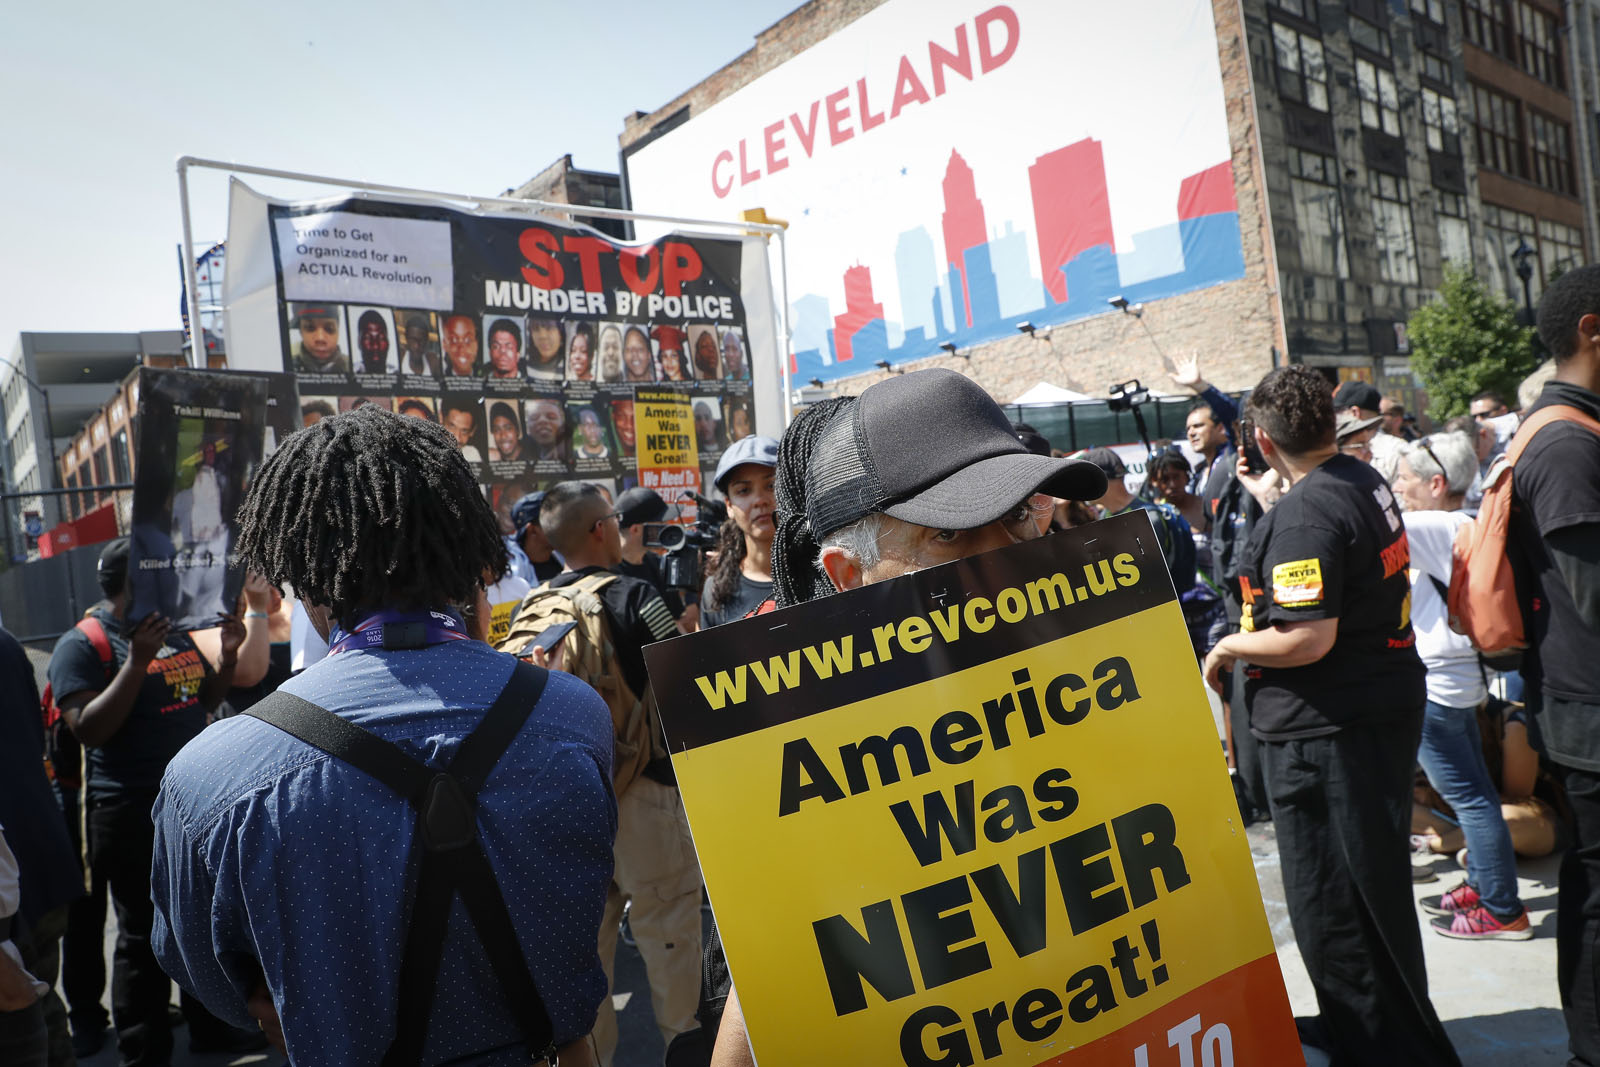 Protestors demonstrate outside the Republican National Convention on Tuesday, July 19, 2016, in Cleveland, during the second day of the Republican convention. (AP Photo/John Minchillo)